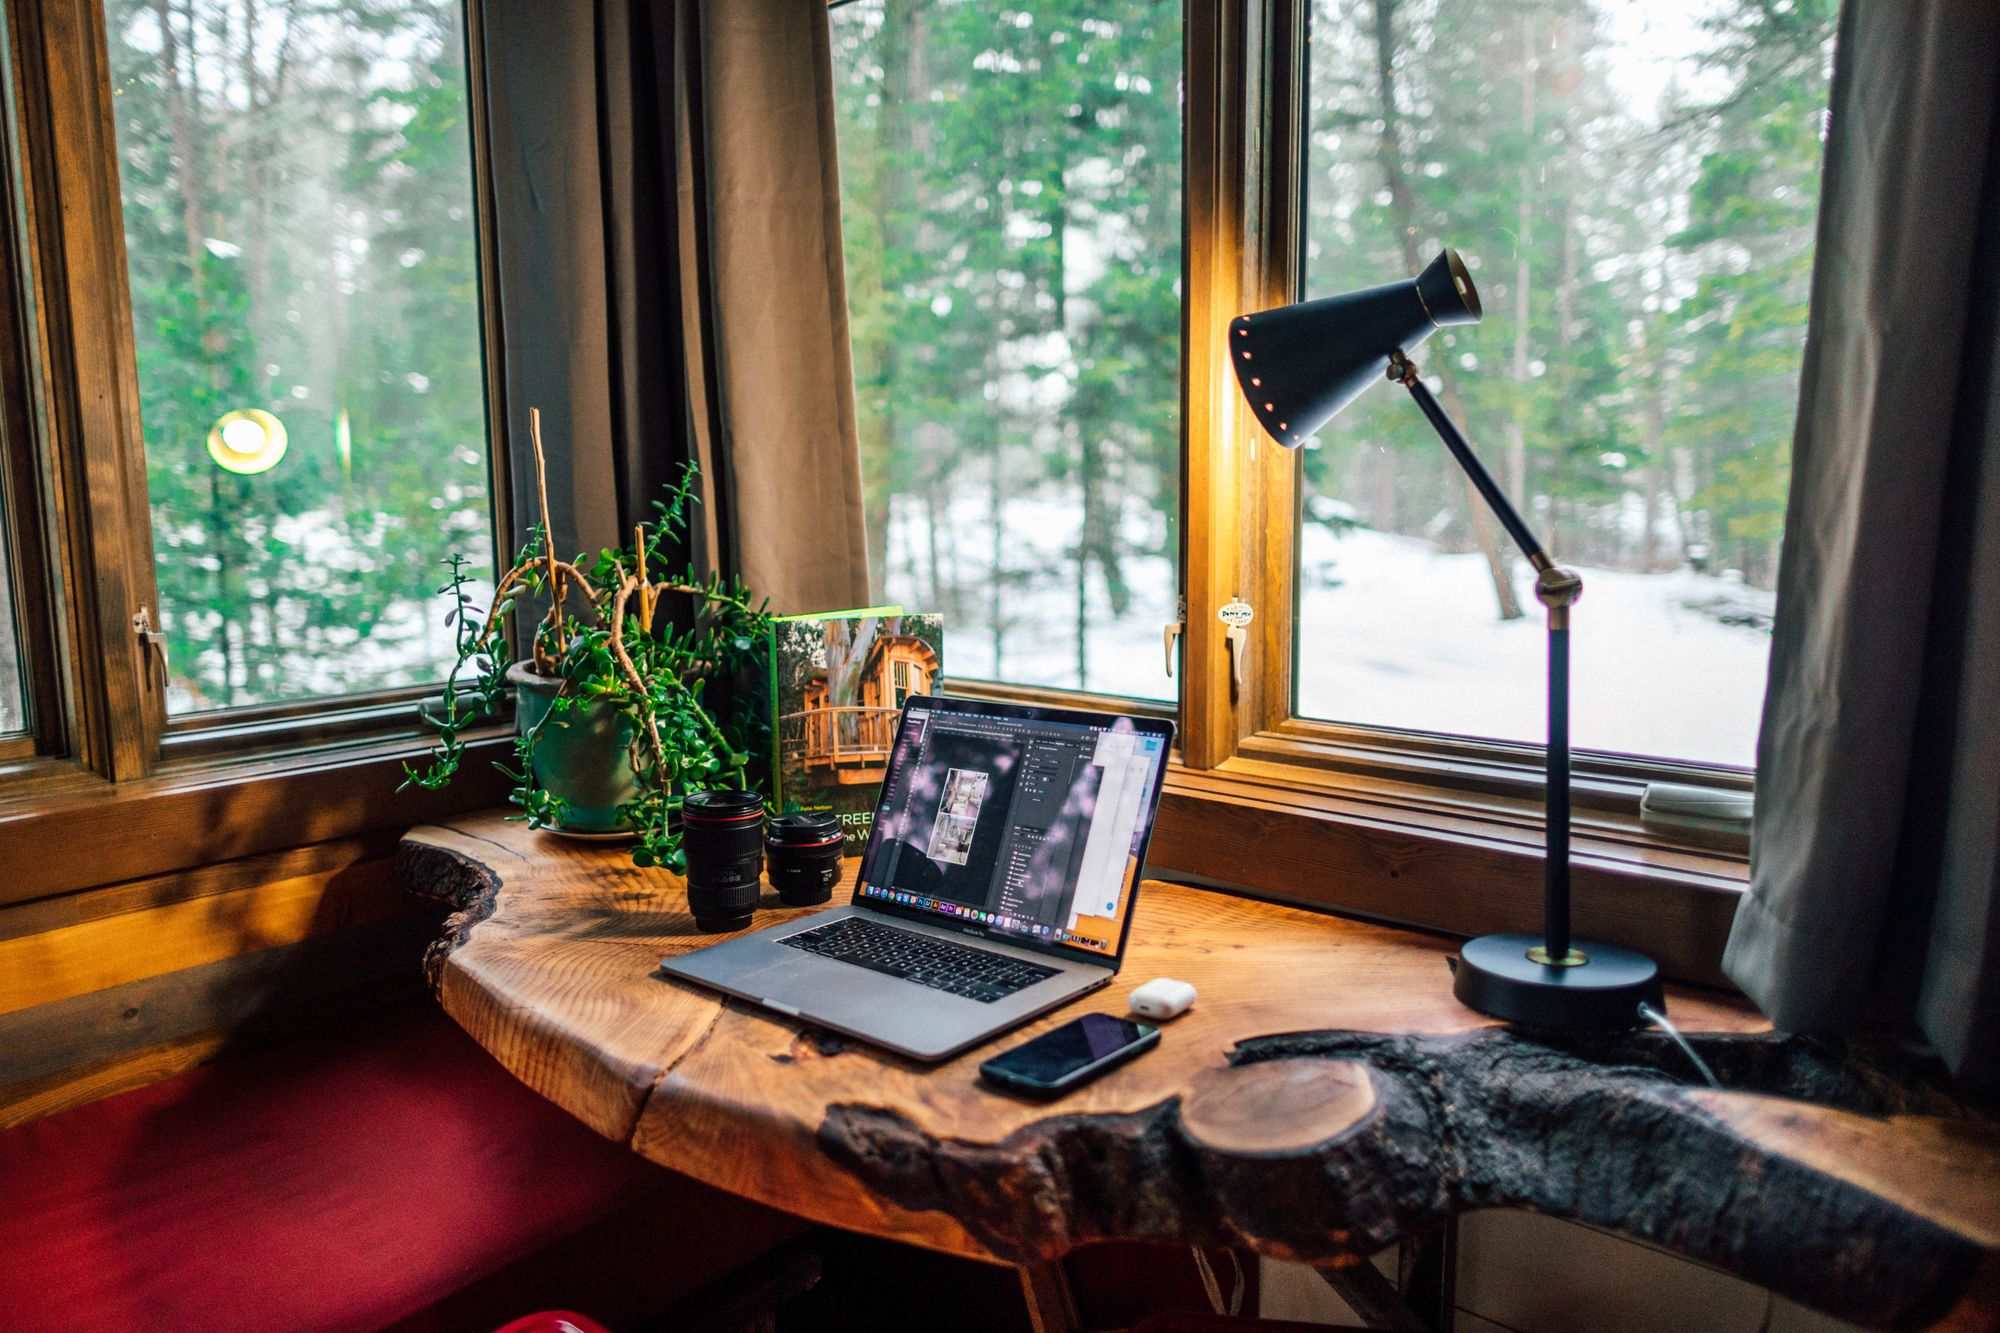 How To Set Up a Home Office Space to Work From Home